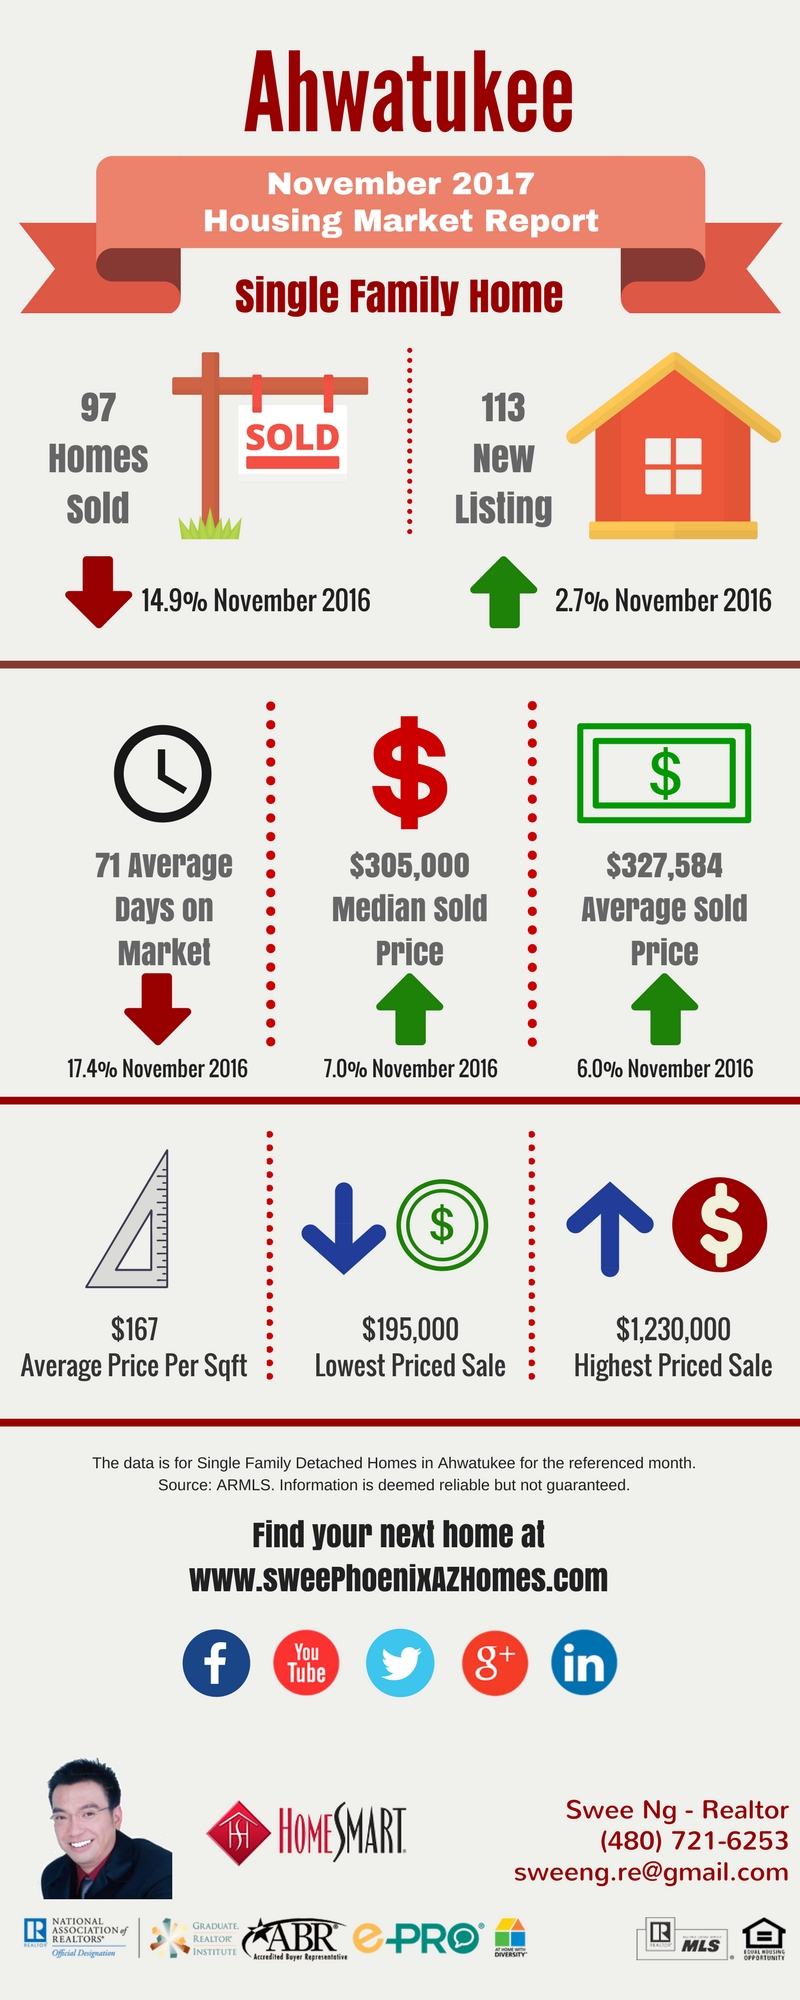 Ahwatukee Housing Market Trends Report November 2017, House Value, Real Estate and Statistic by Swee Ng